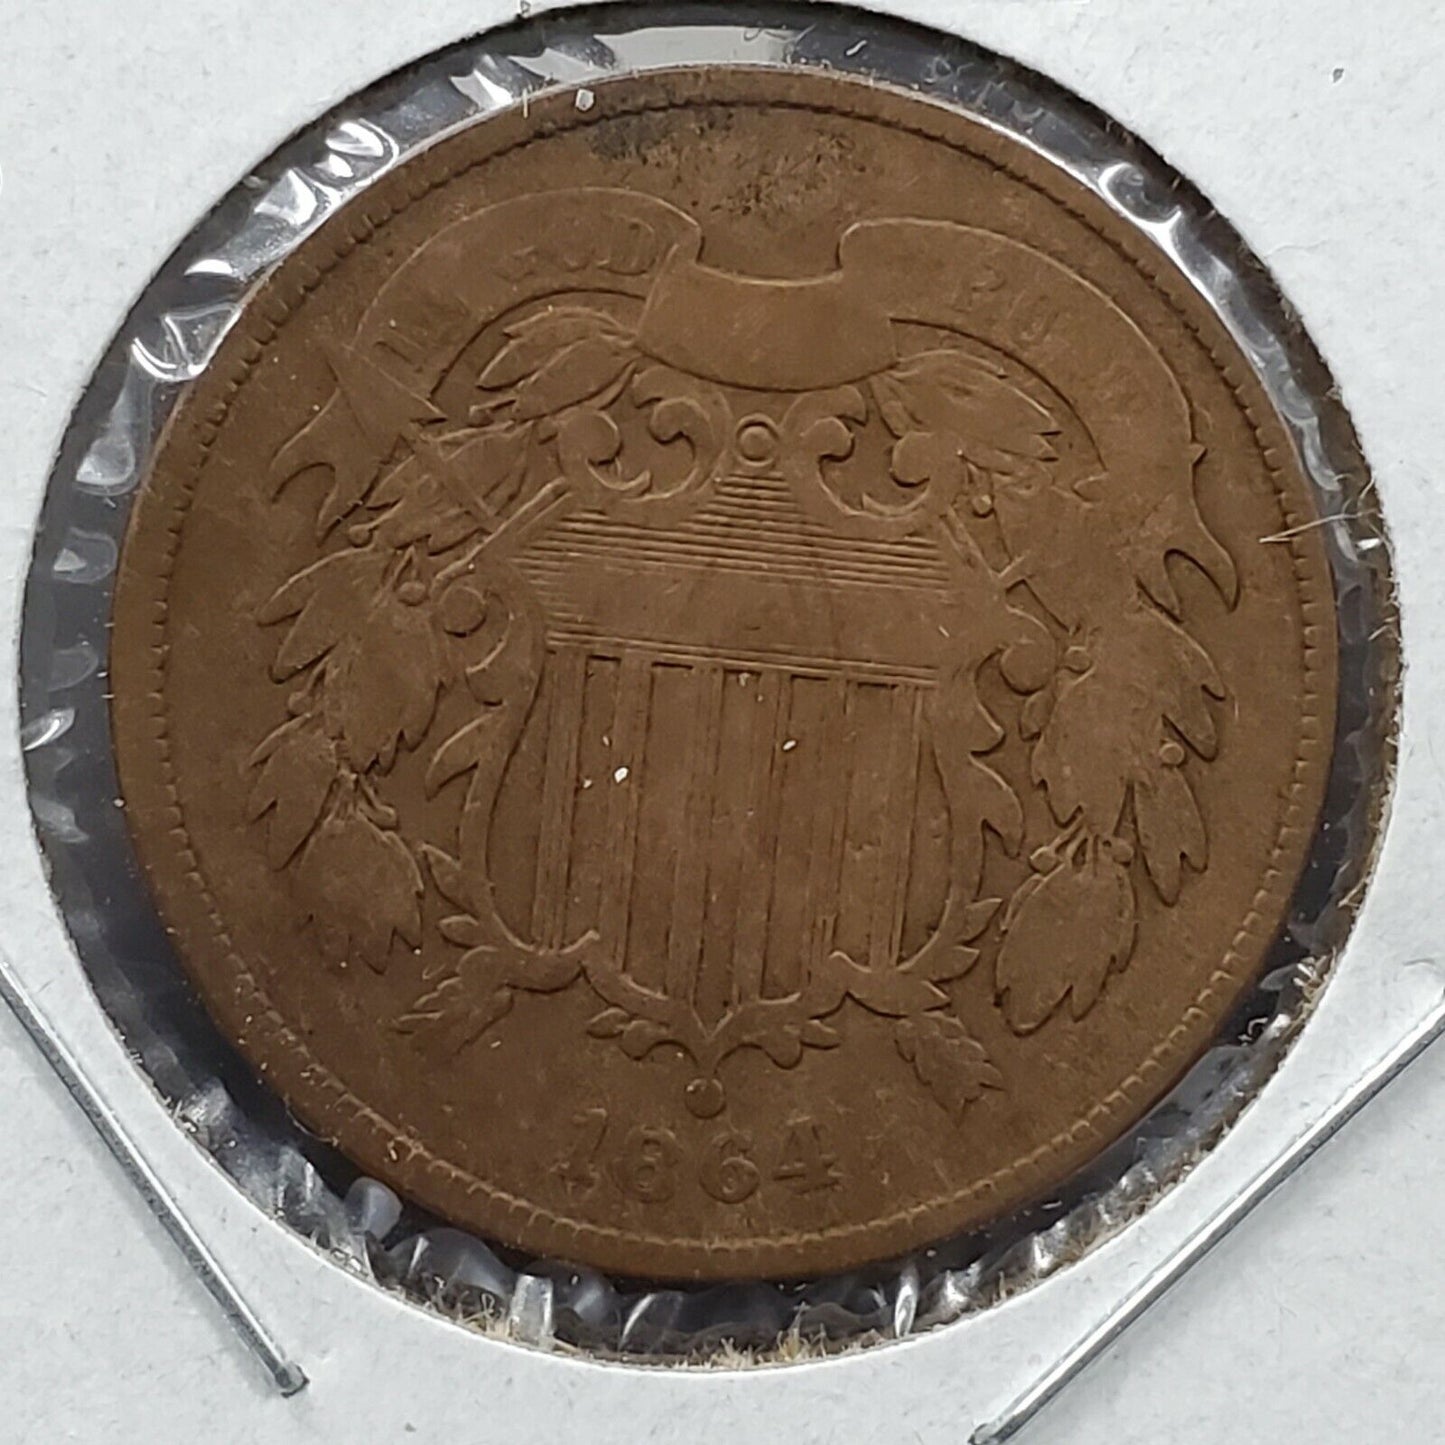 Repriced From 2021- 1864 2C Two Cent Copper Coin Piece LM RPD FS-1303 Variety